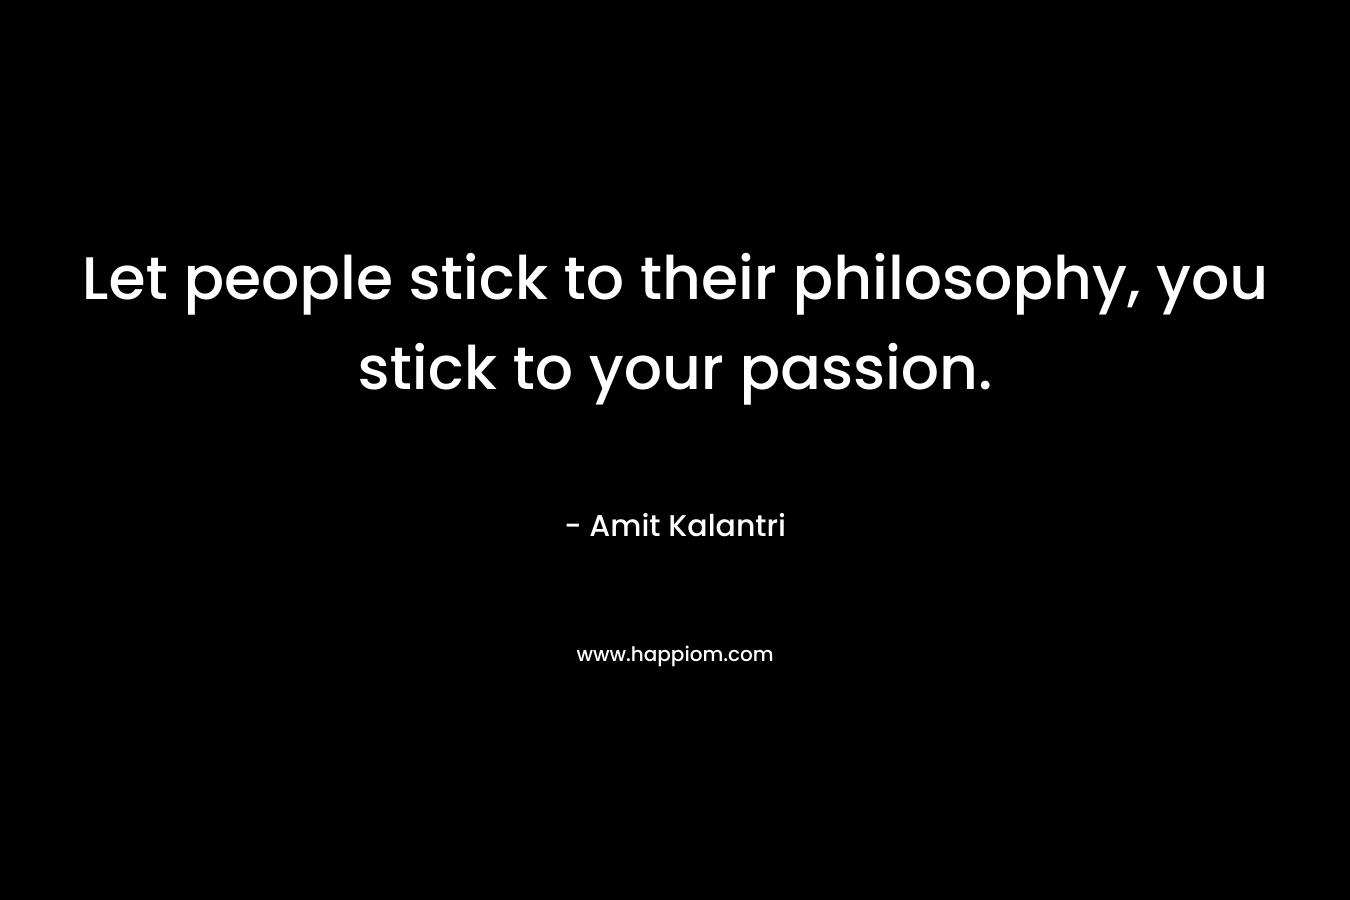 Let people stick to their philosophy, you stick to your passion.